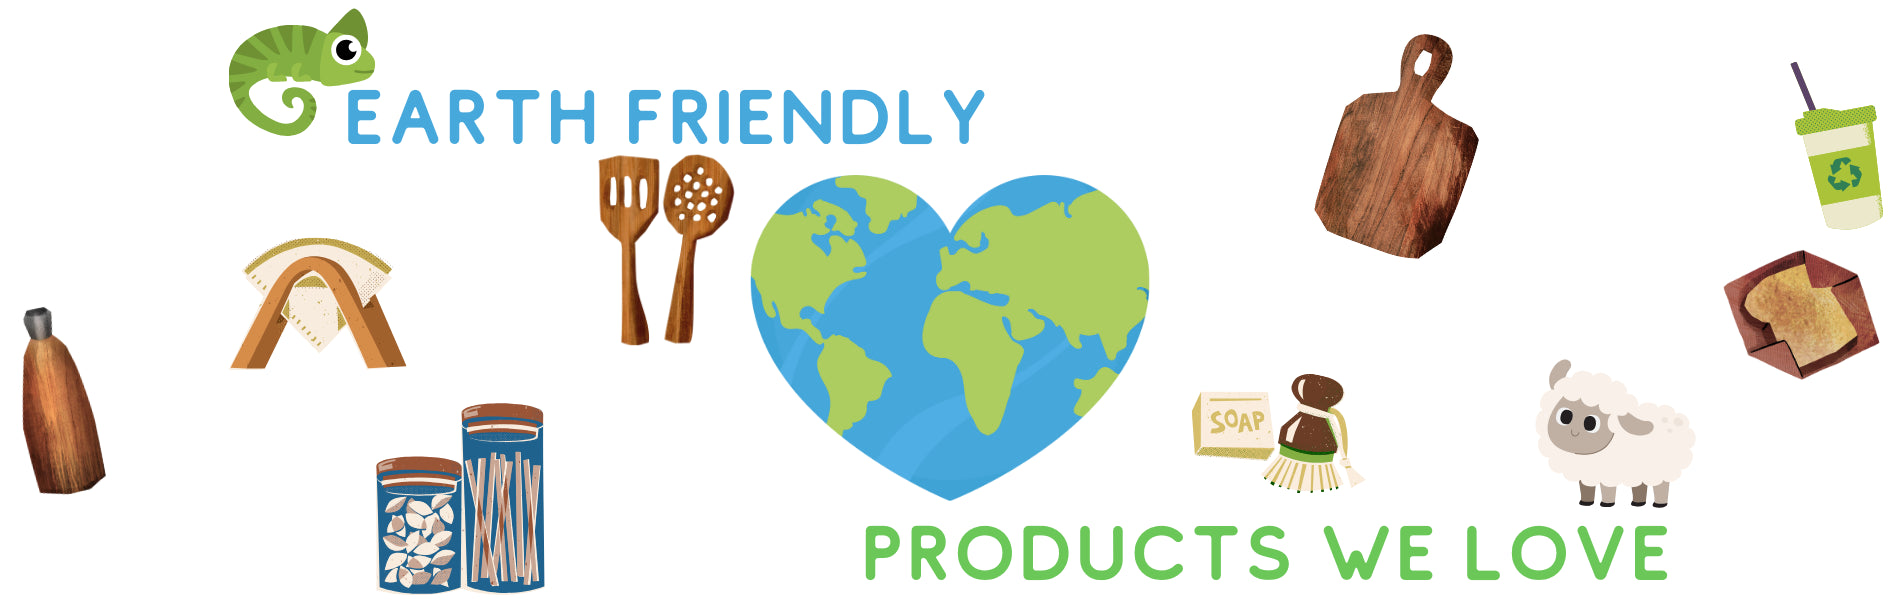 Earth Friendly Products With Eco-Conscious Sourcing And Natural Materials For A Fresh Spring